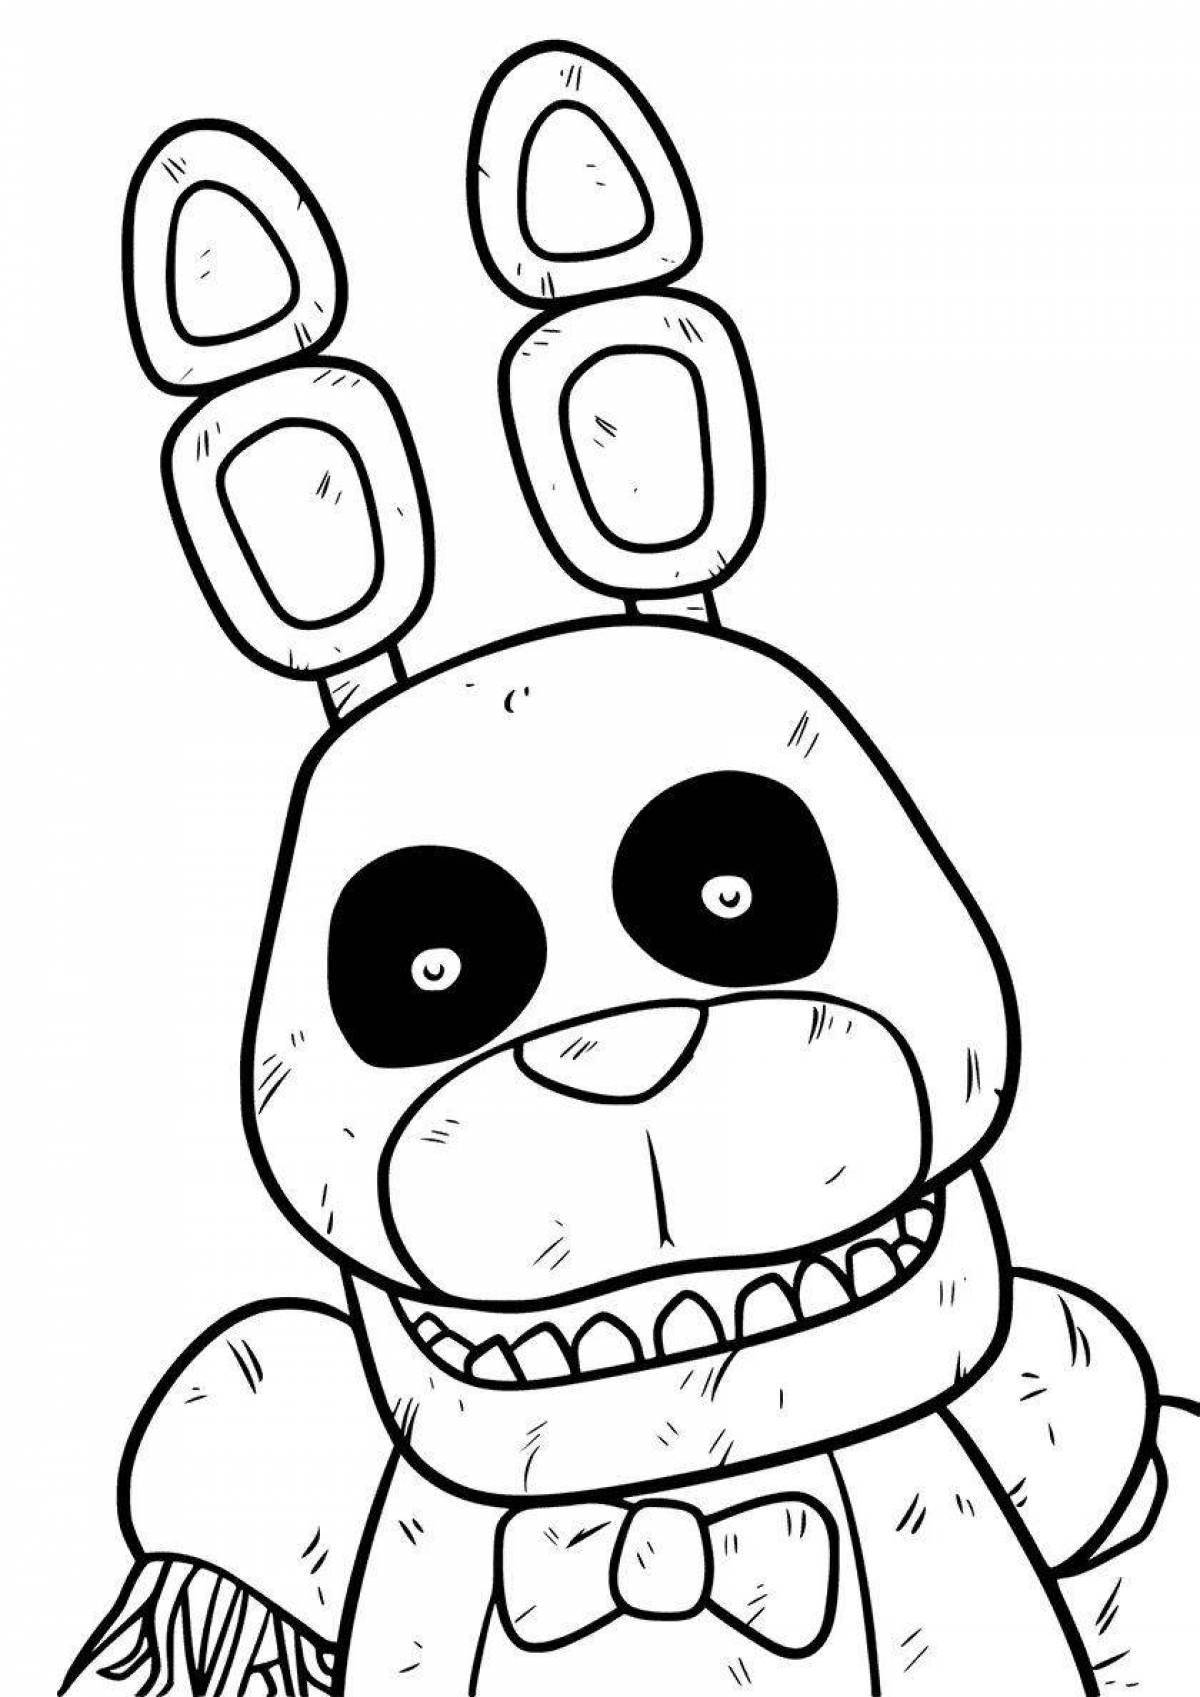 Colorful bonnie from freddy's coloring book